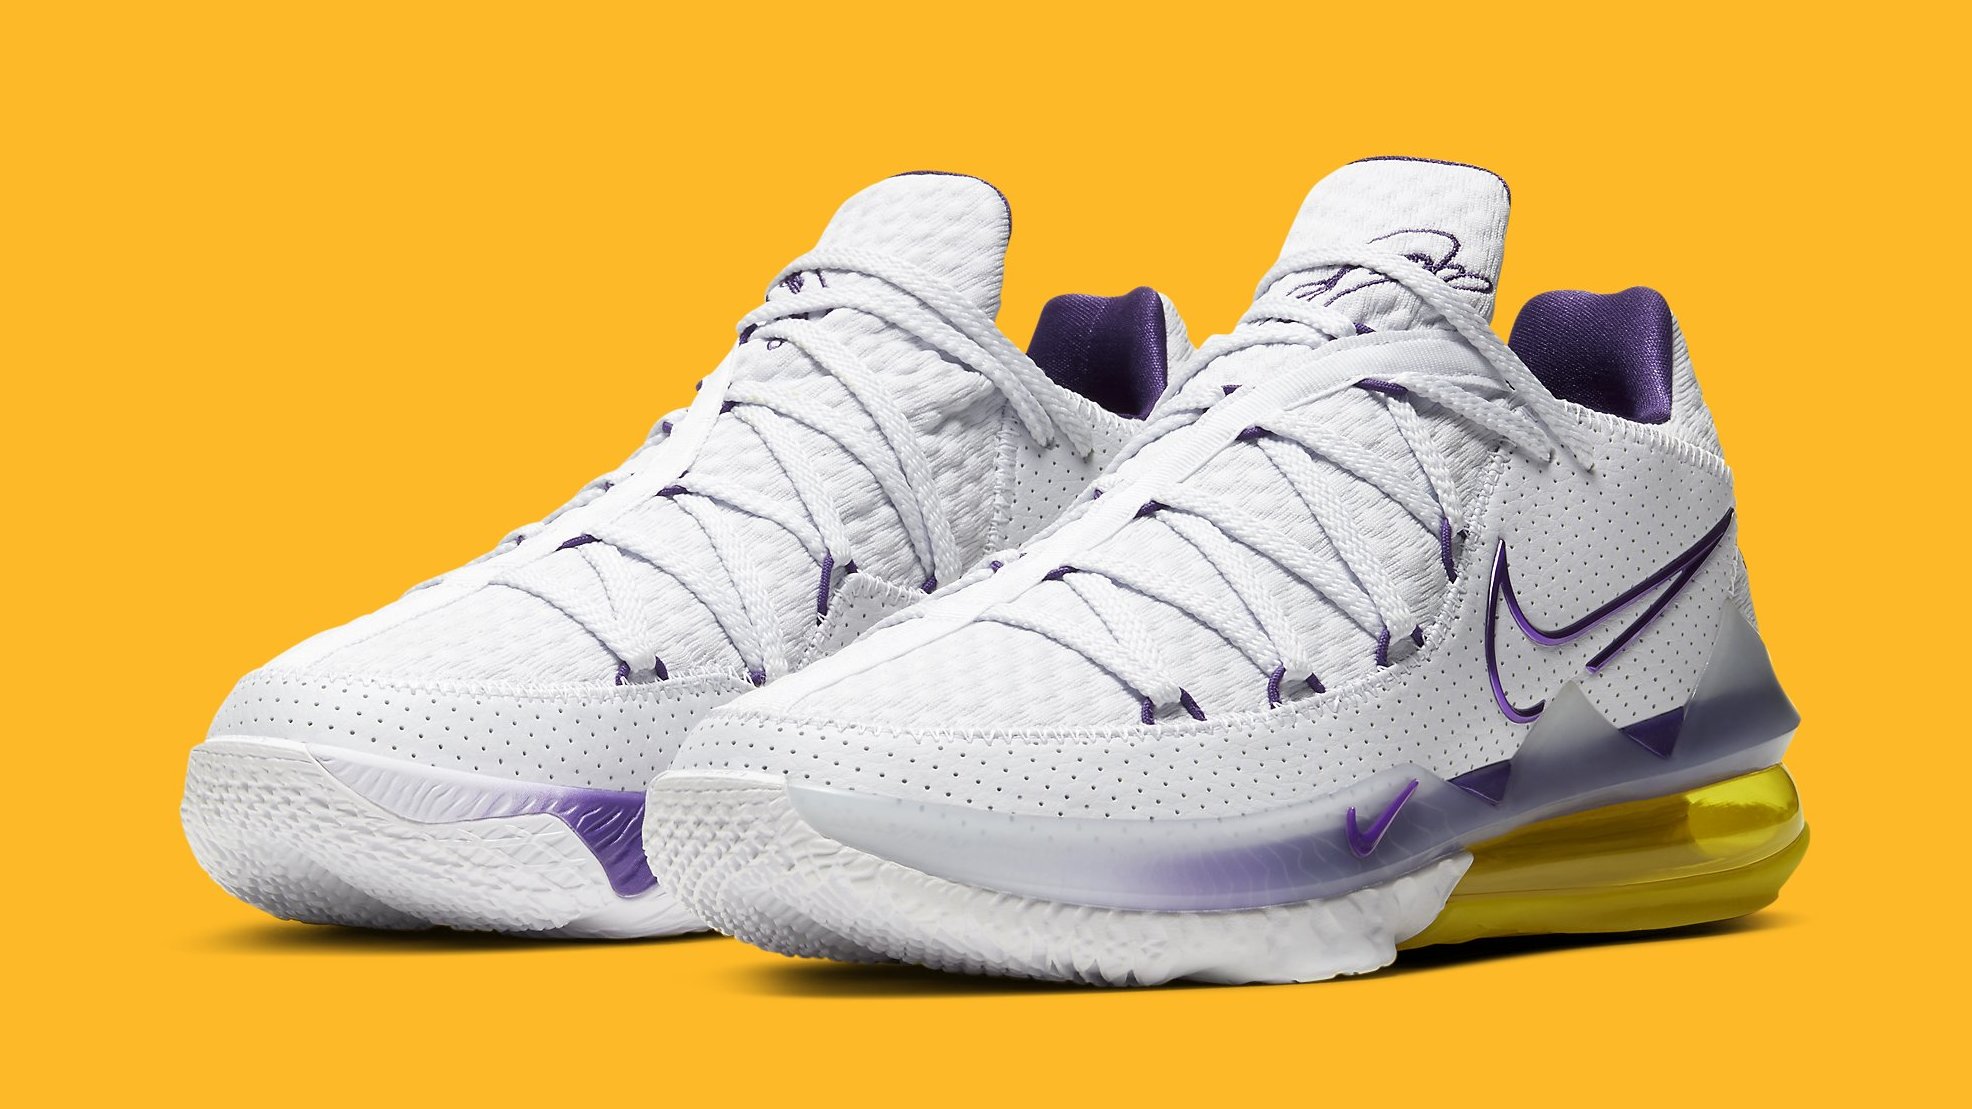 lebron low lakers